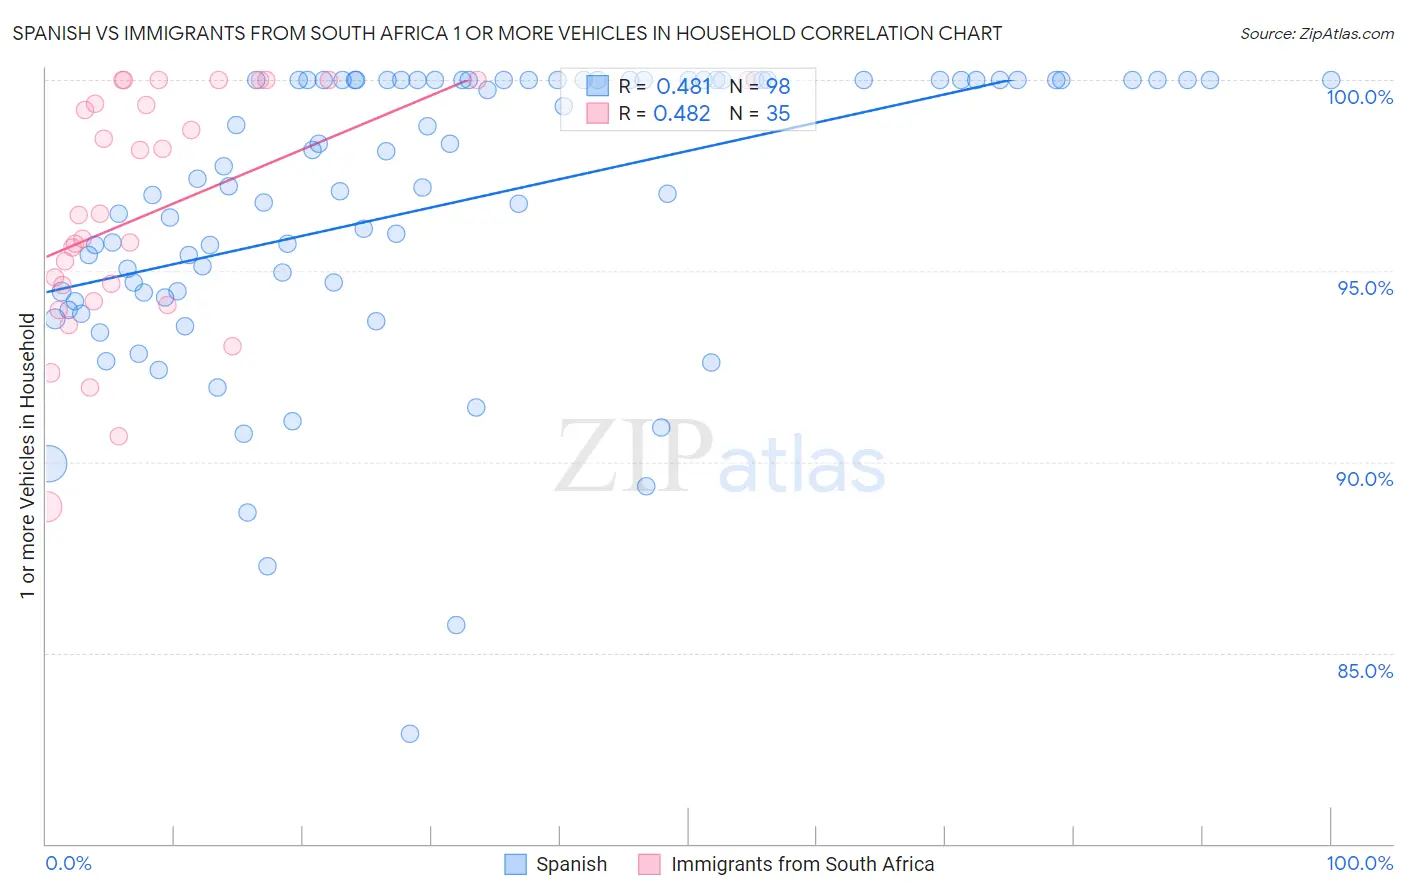 Spanish vs Immigrants from South Africa 1 or more Vehicles in Household